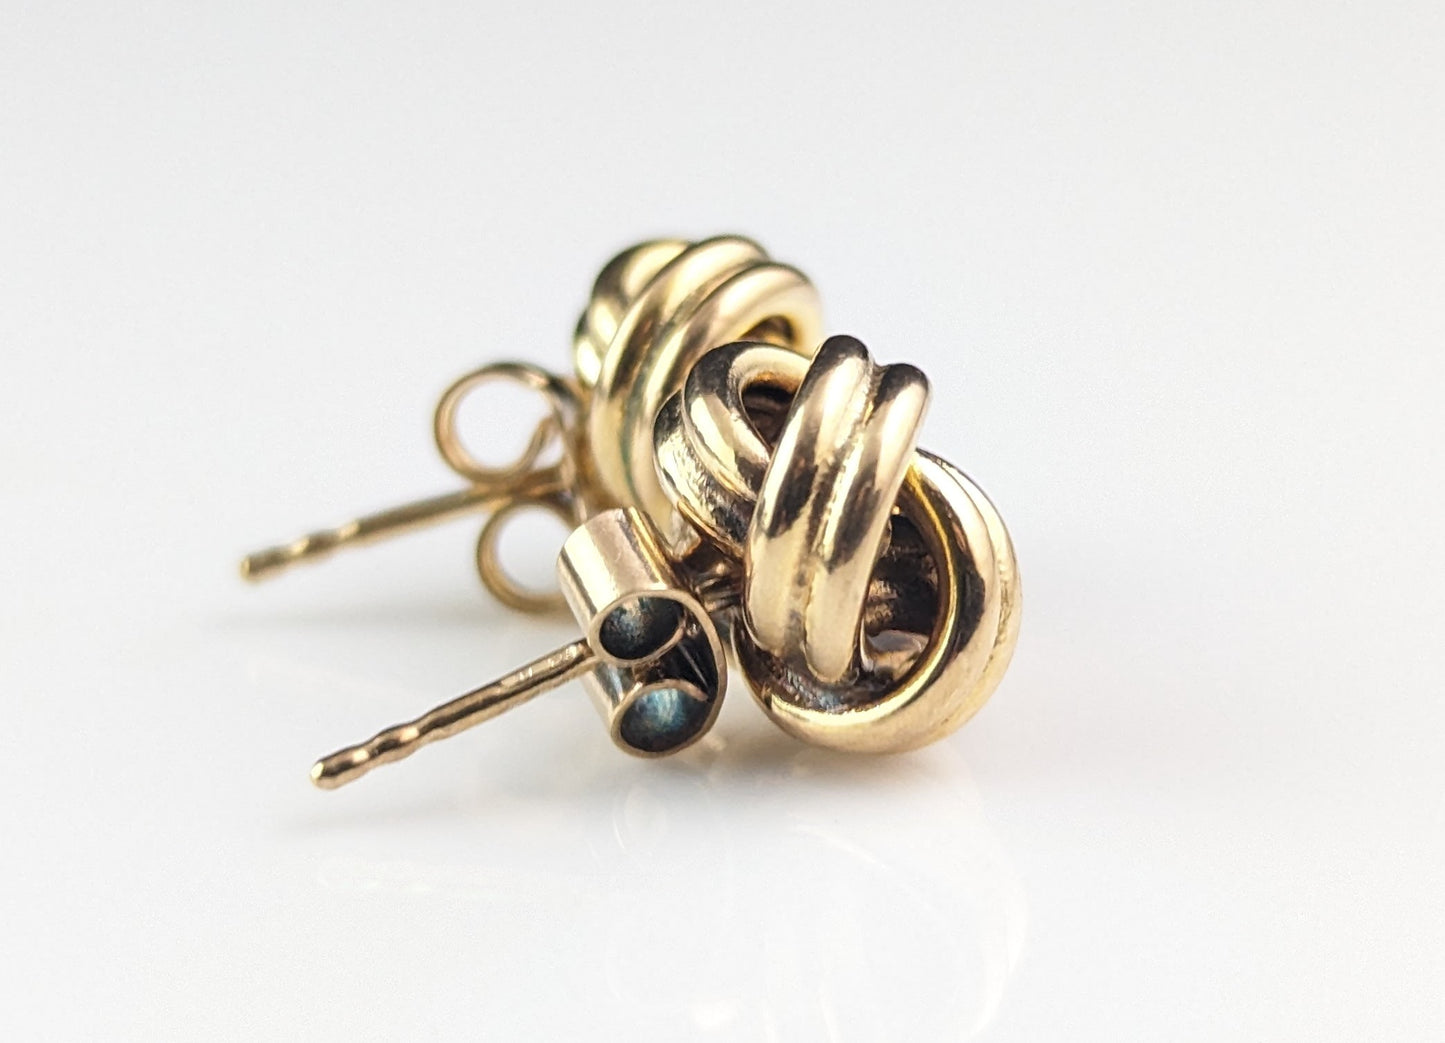 Vintage 9ct yellow gold lovers knot earrings, studs